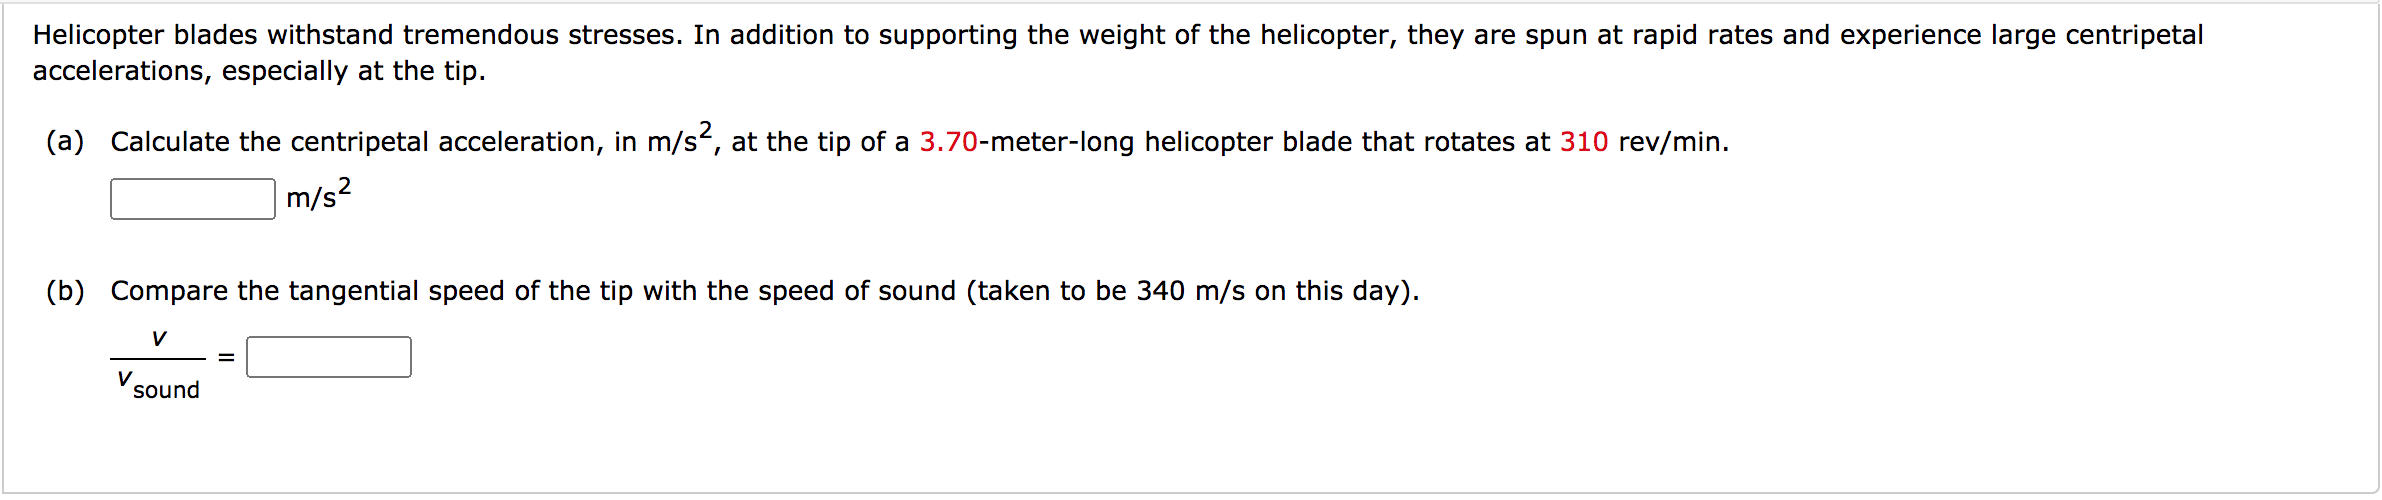 Helicopter blades withstand tremendous stresses. In addition to supporting the weight of the helicopter, they are spun at rapid rates and experience large centripetal
accelerations, especially at the tip.
(a) Calculate the centripetal acceleration, in m/s, at the tip of a 3.70-meter-long helicopter blade that rotates at 310 rev/min.
m/s?
(b) Compare the tangential speed of the tip with the speed of sound (taken to be 340 m/s on this day).
V
V
sound
